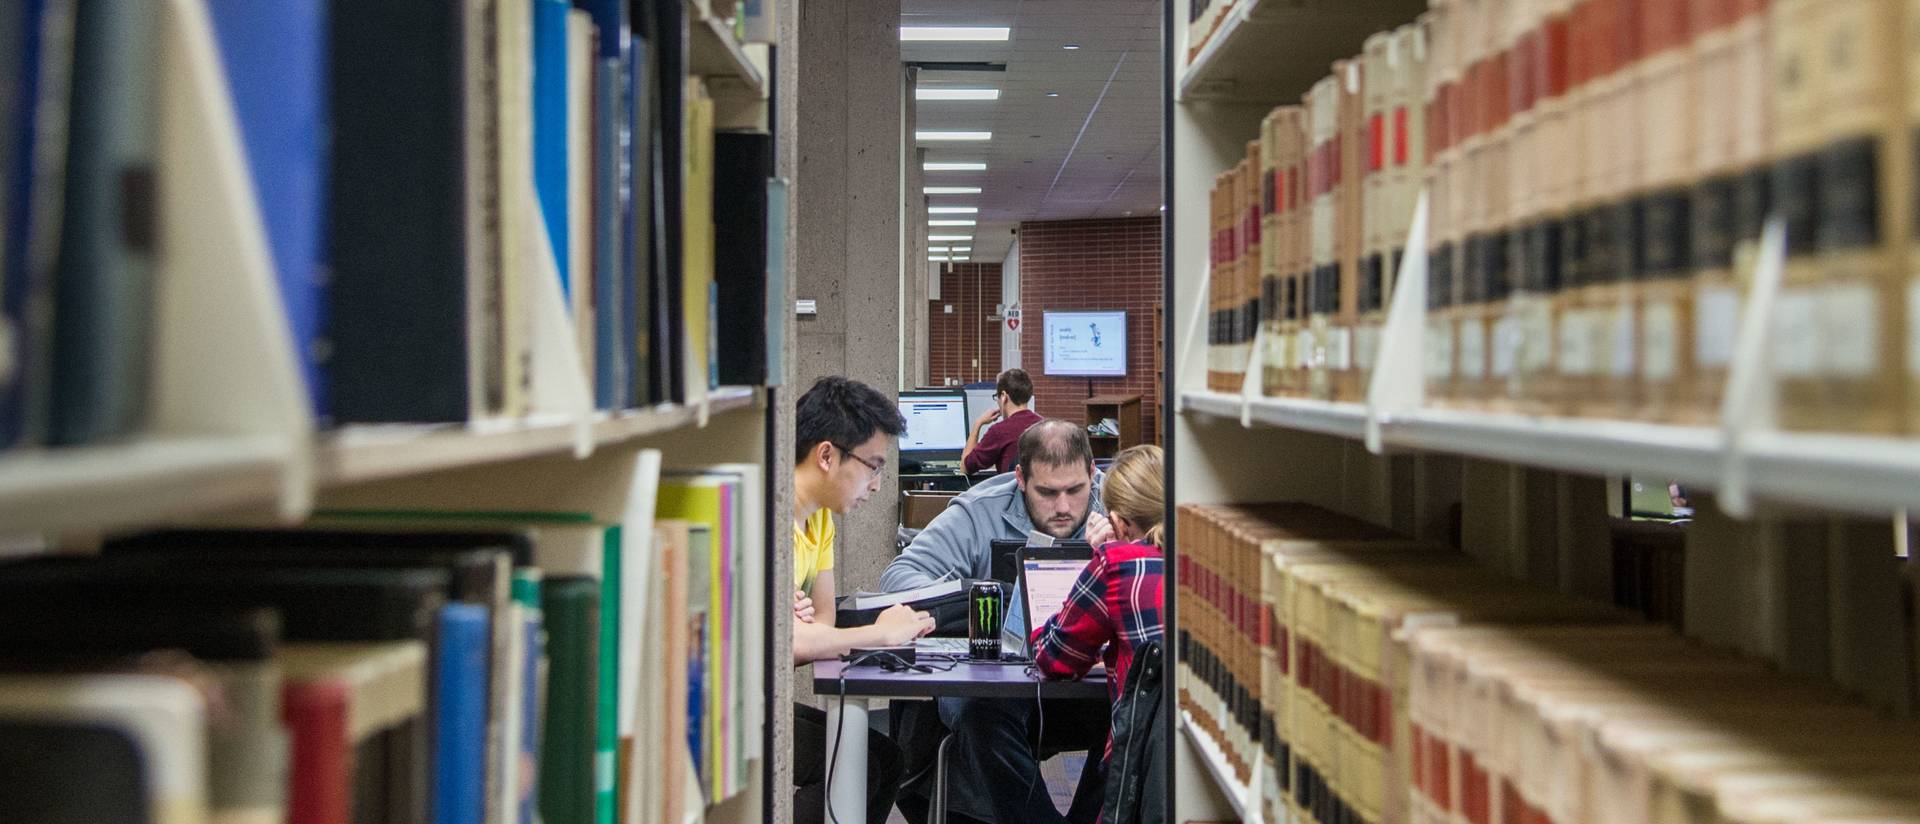 Three students studying in the library